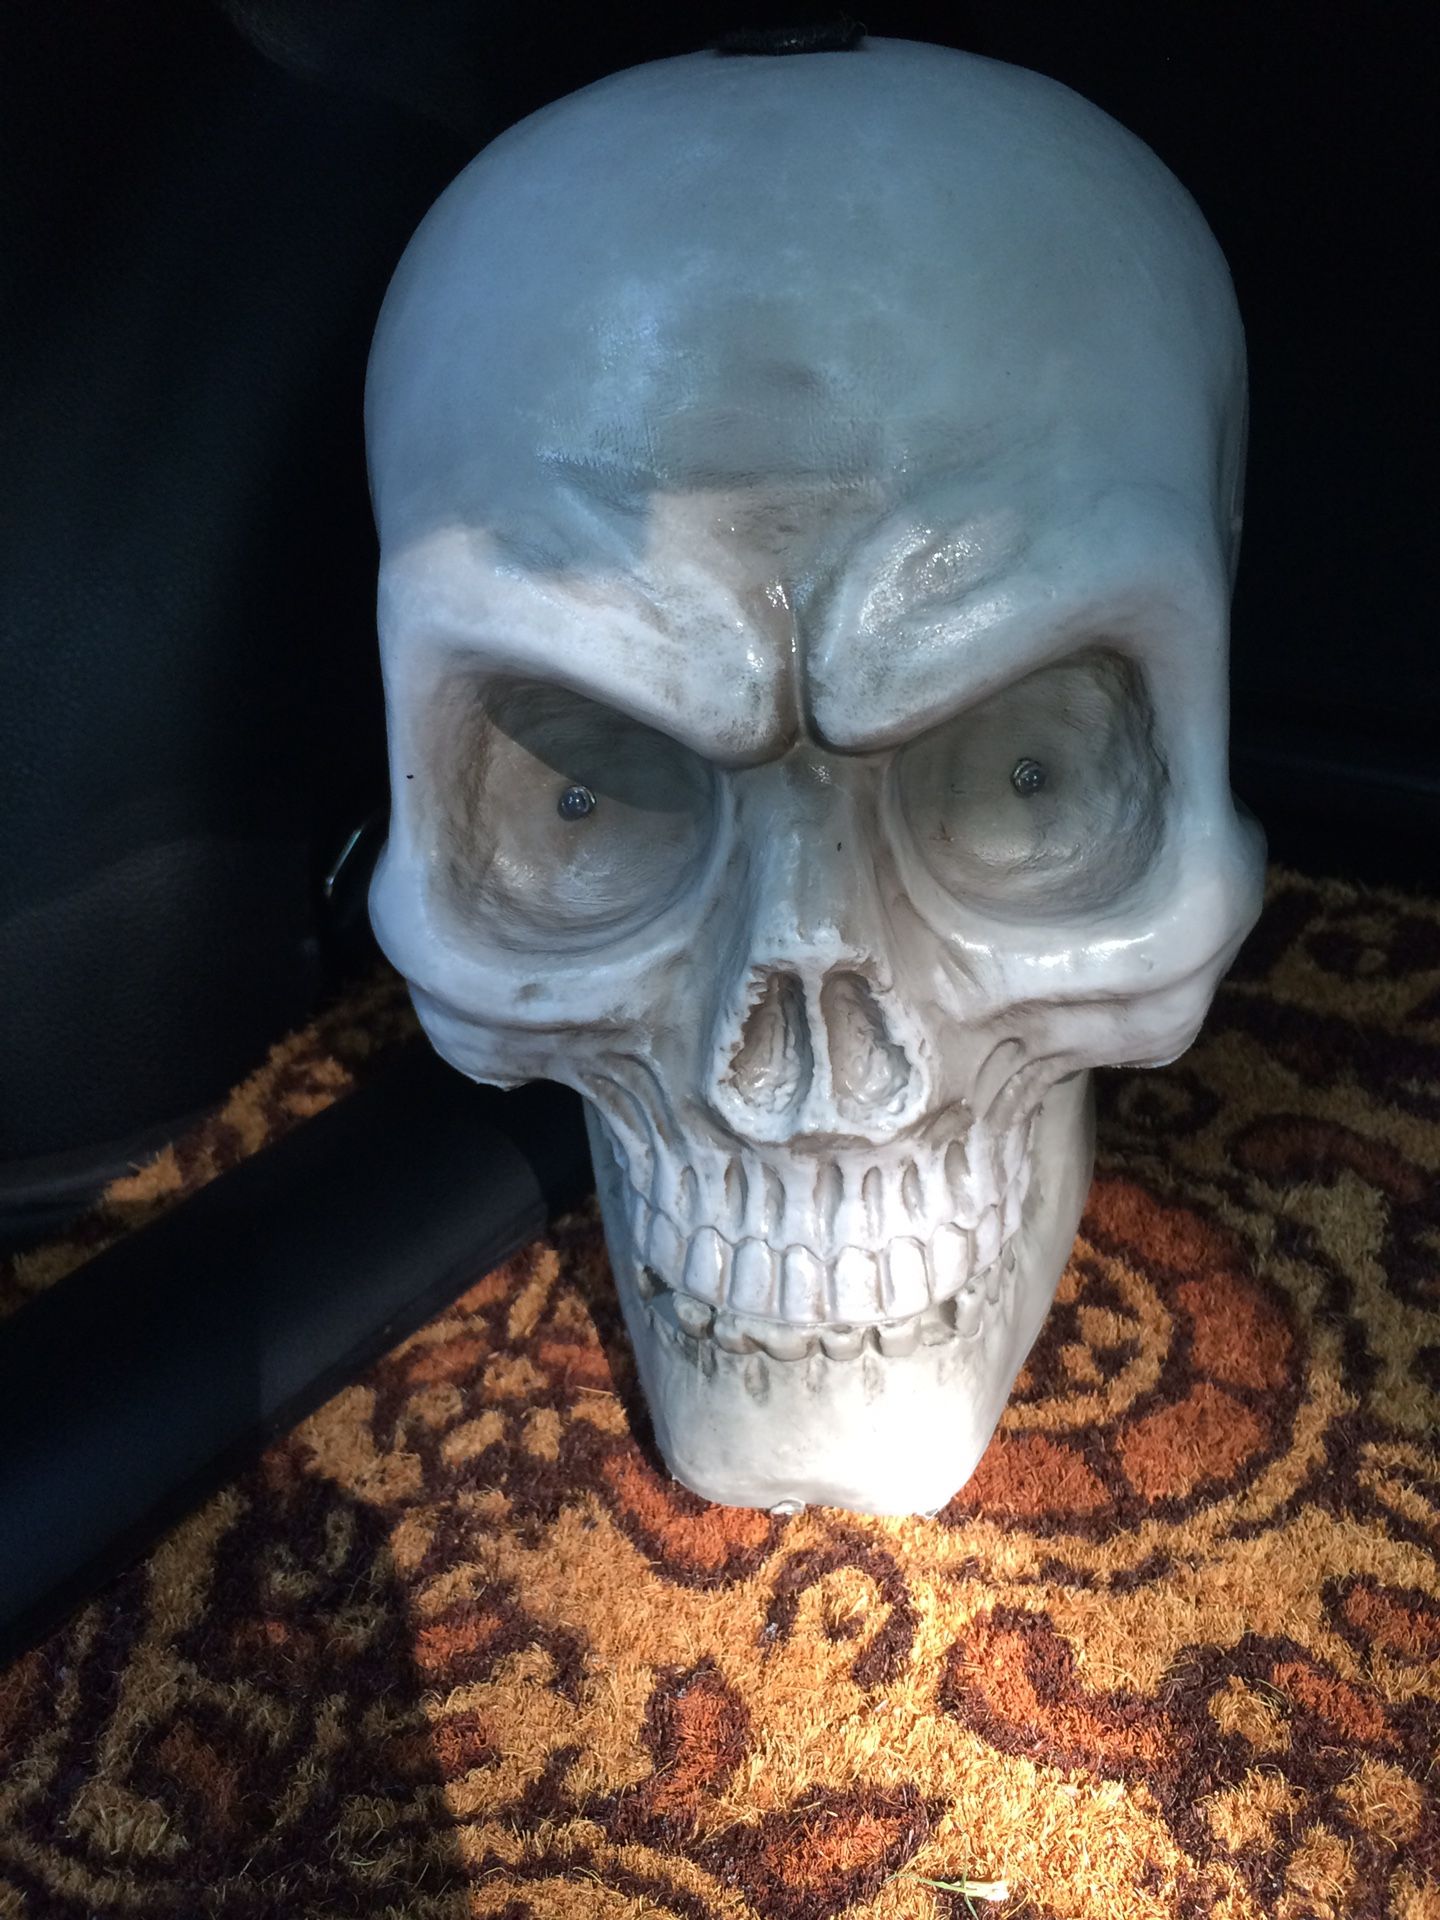 BOO....Get Your Halloween On...with this Scary Plastic Skull